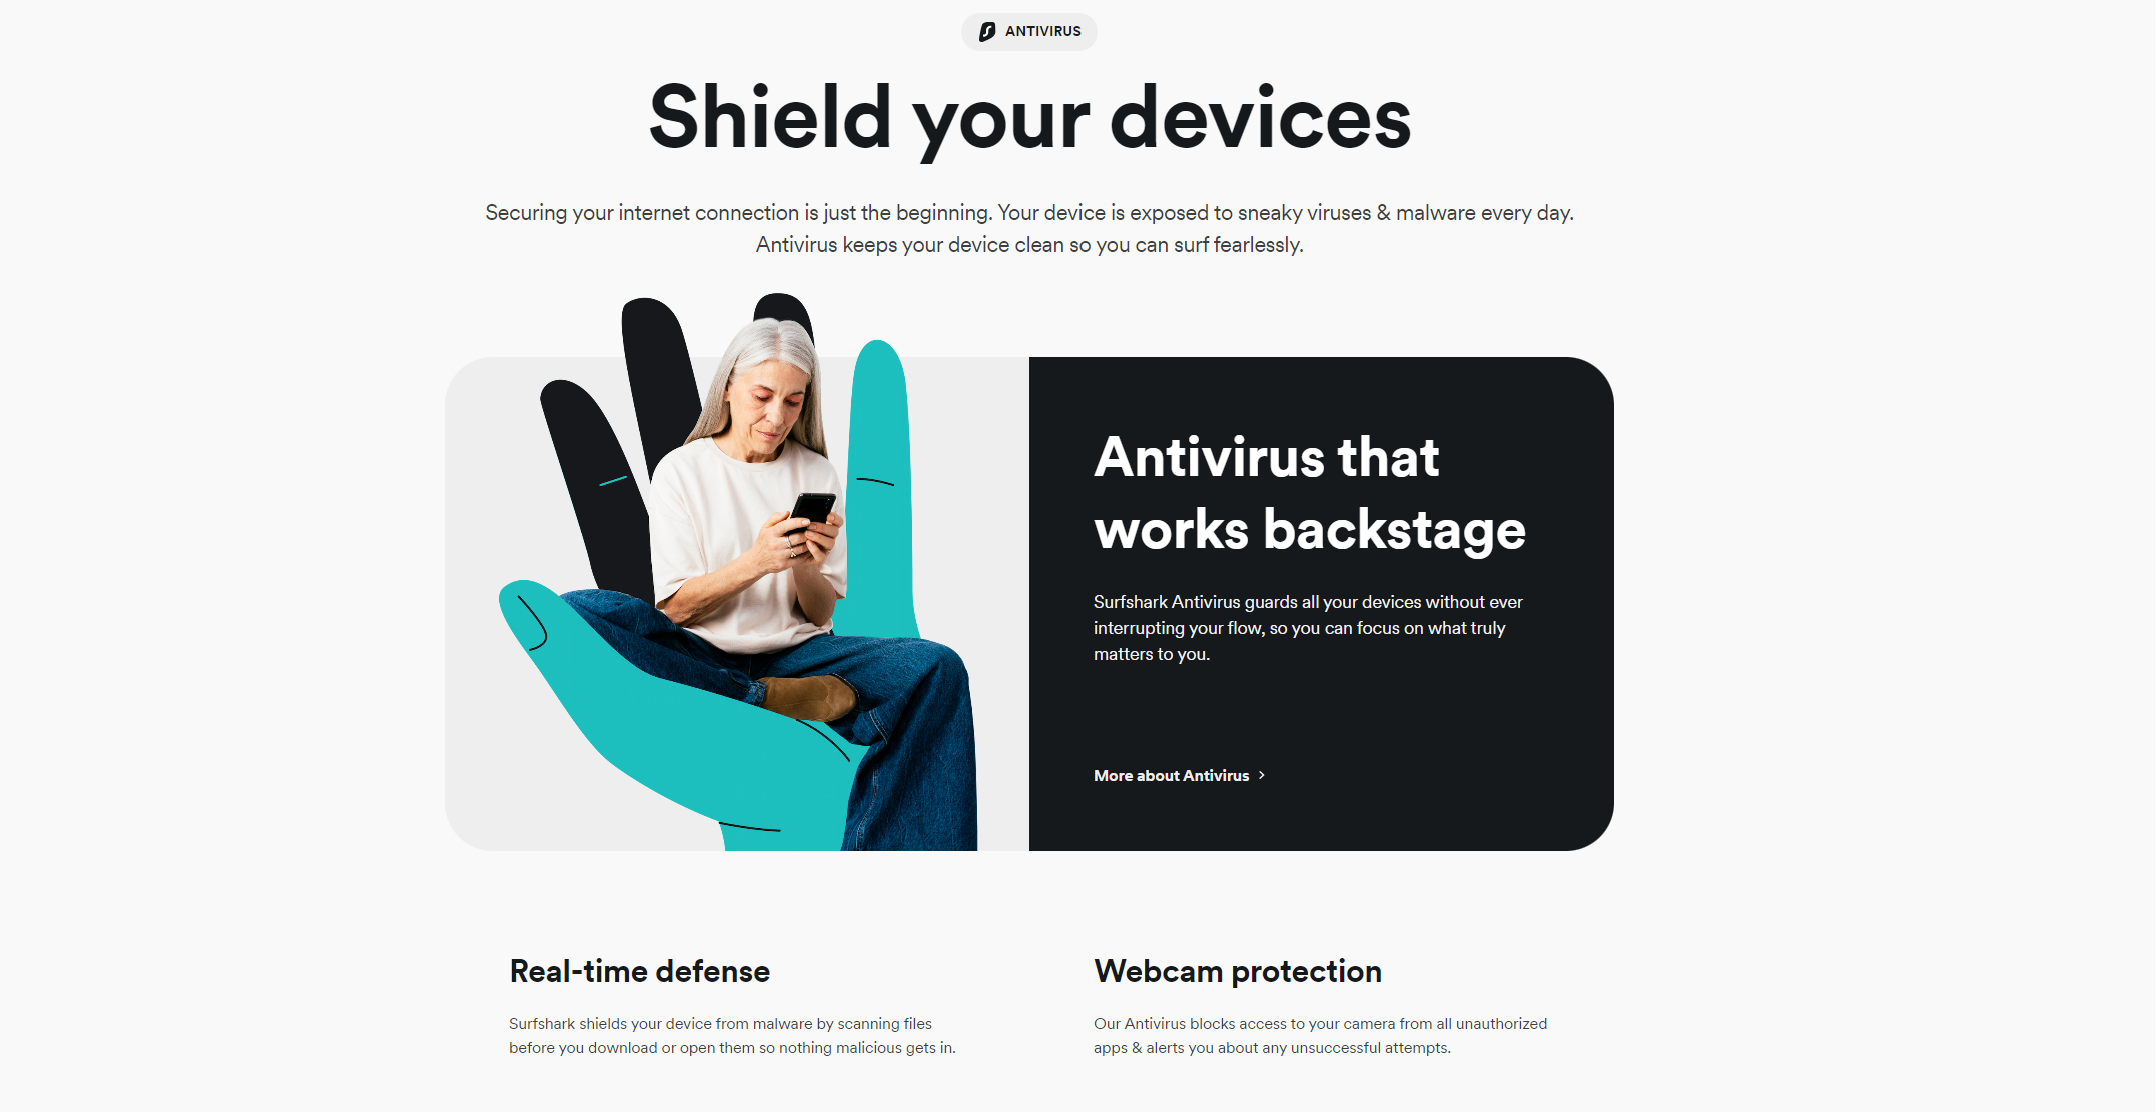 Shield your devices